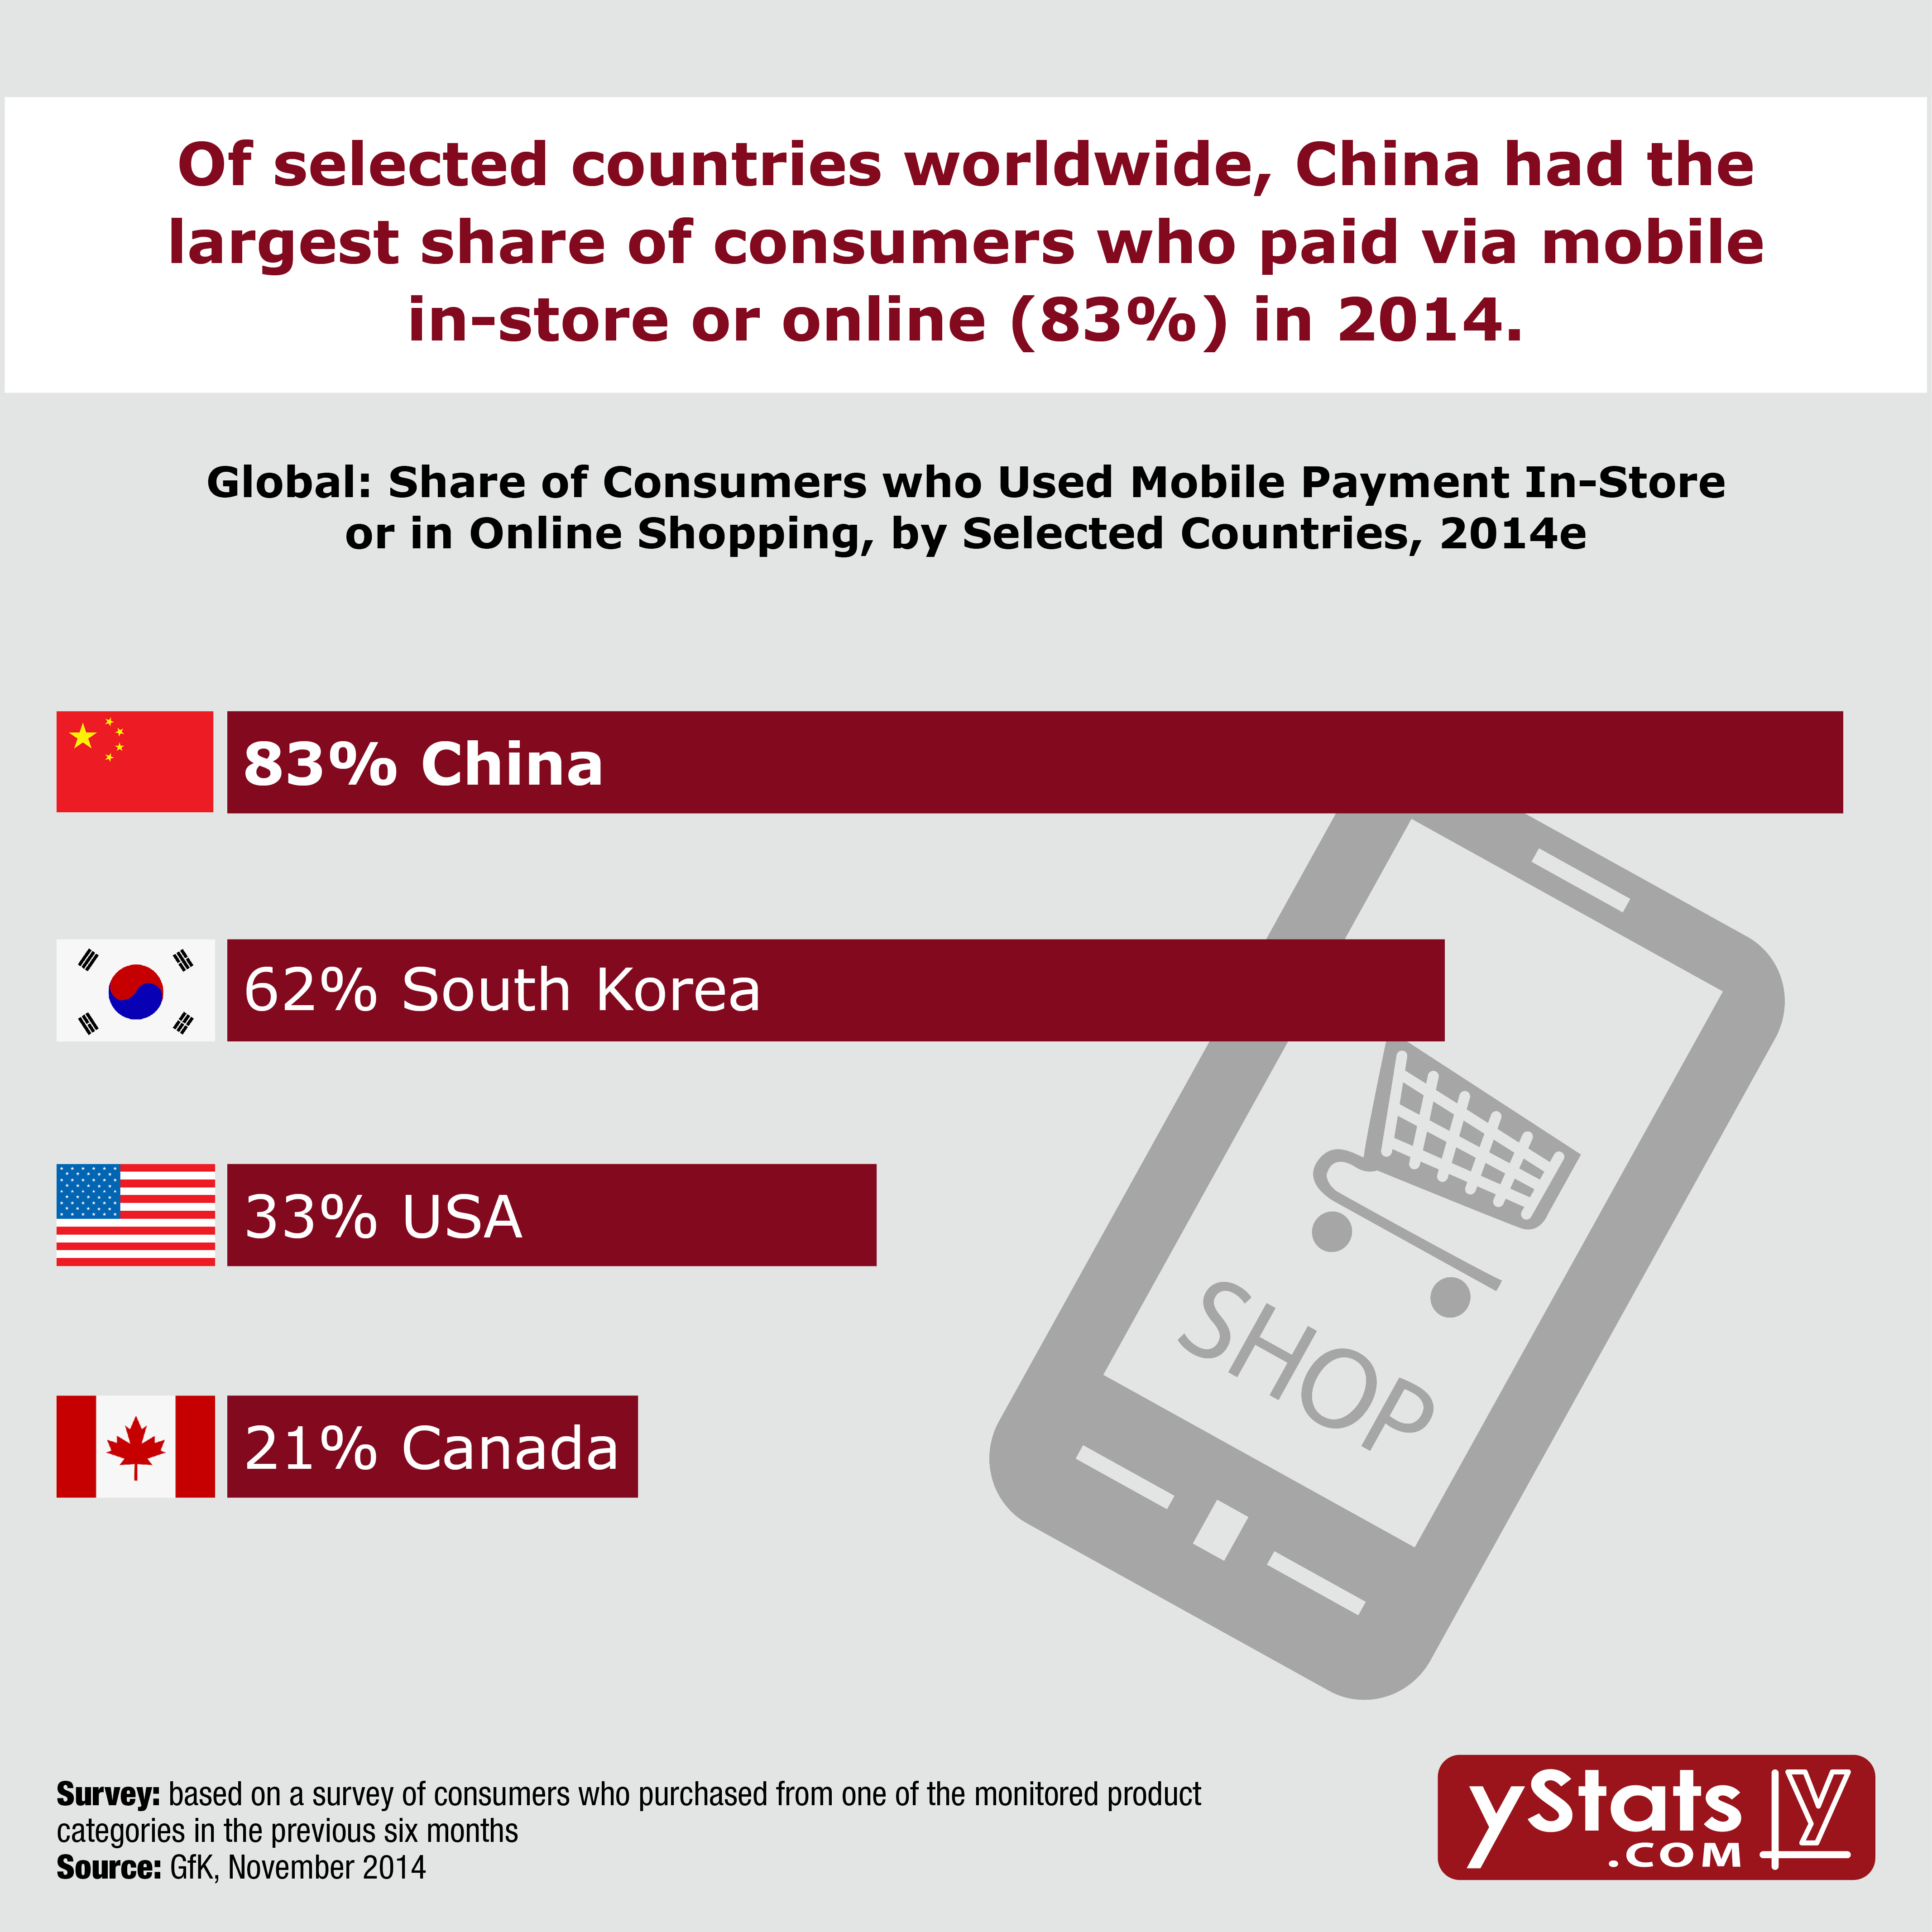 yStats.com Global Mobile Payment 2014 Infographic